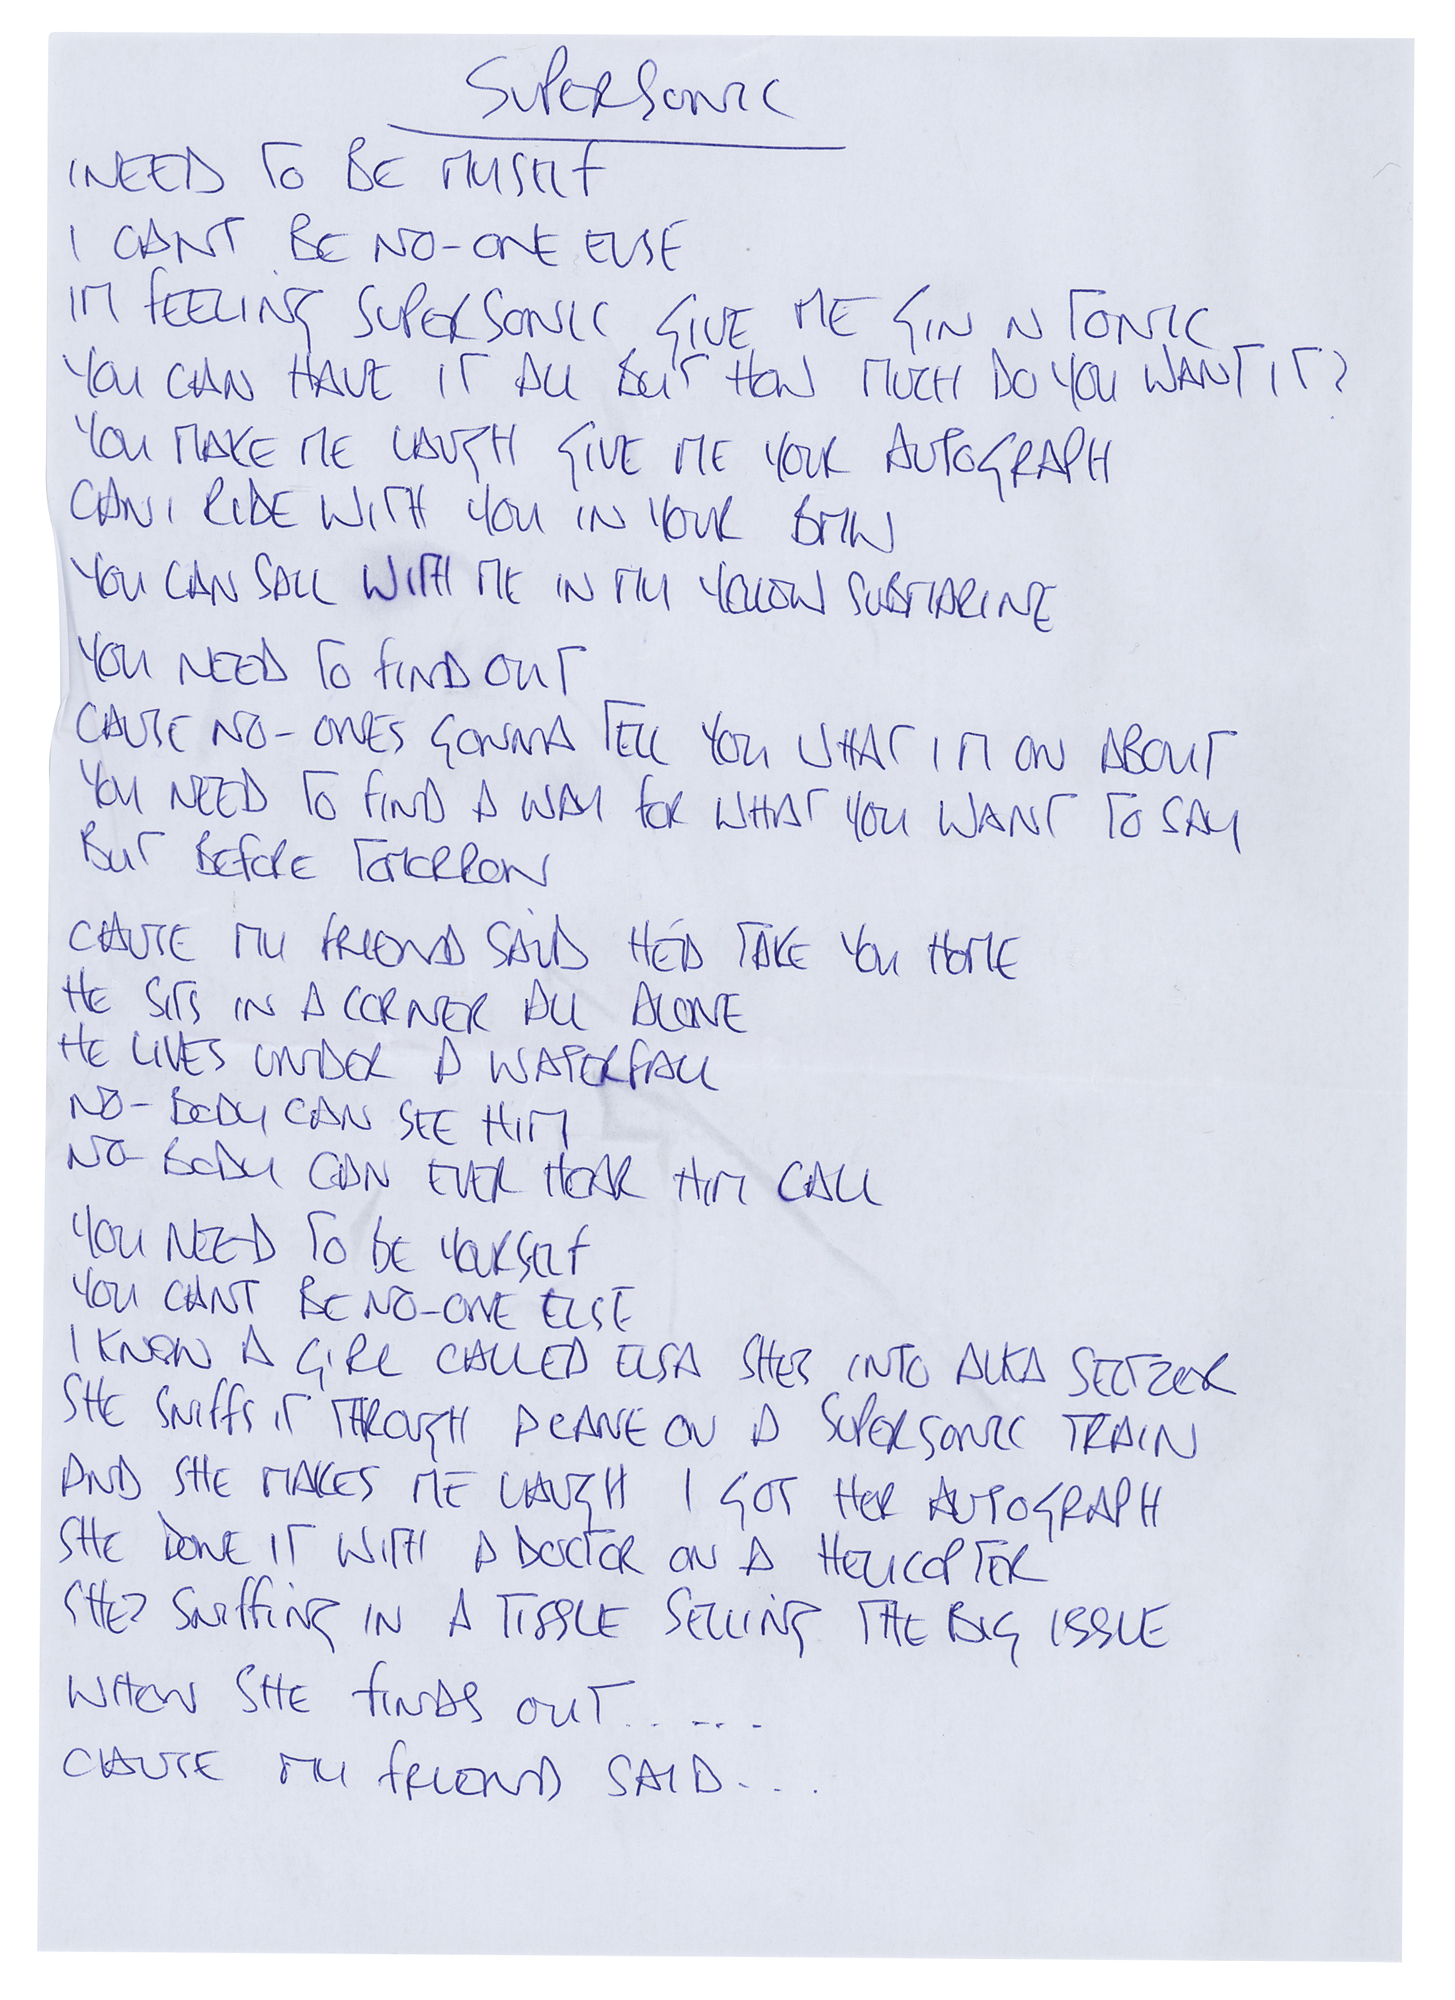 Lot #628 Oasis: Noel Gallagher Handwritten Lyrics (13) for Definitely Maybe, with CD Signed by the Gallagher Brothers - Image 12